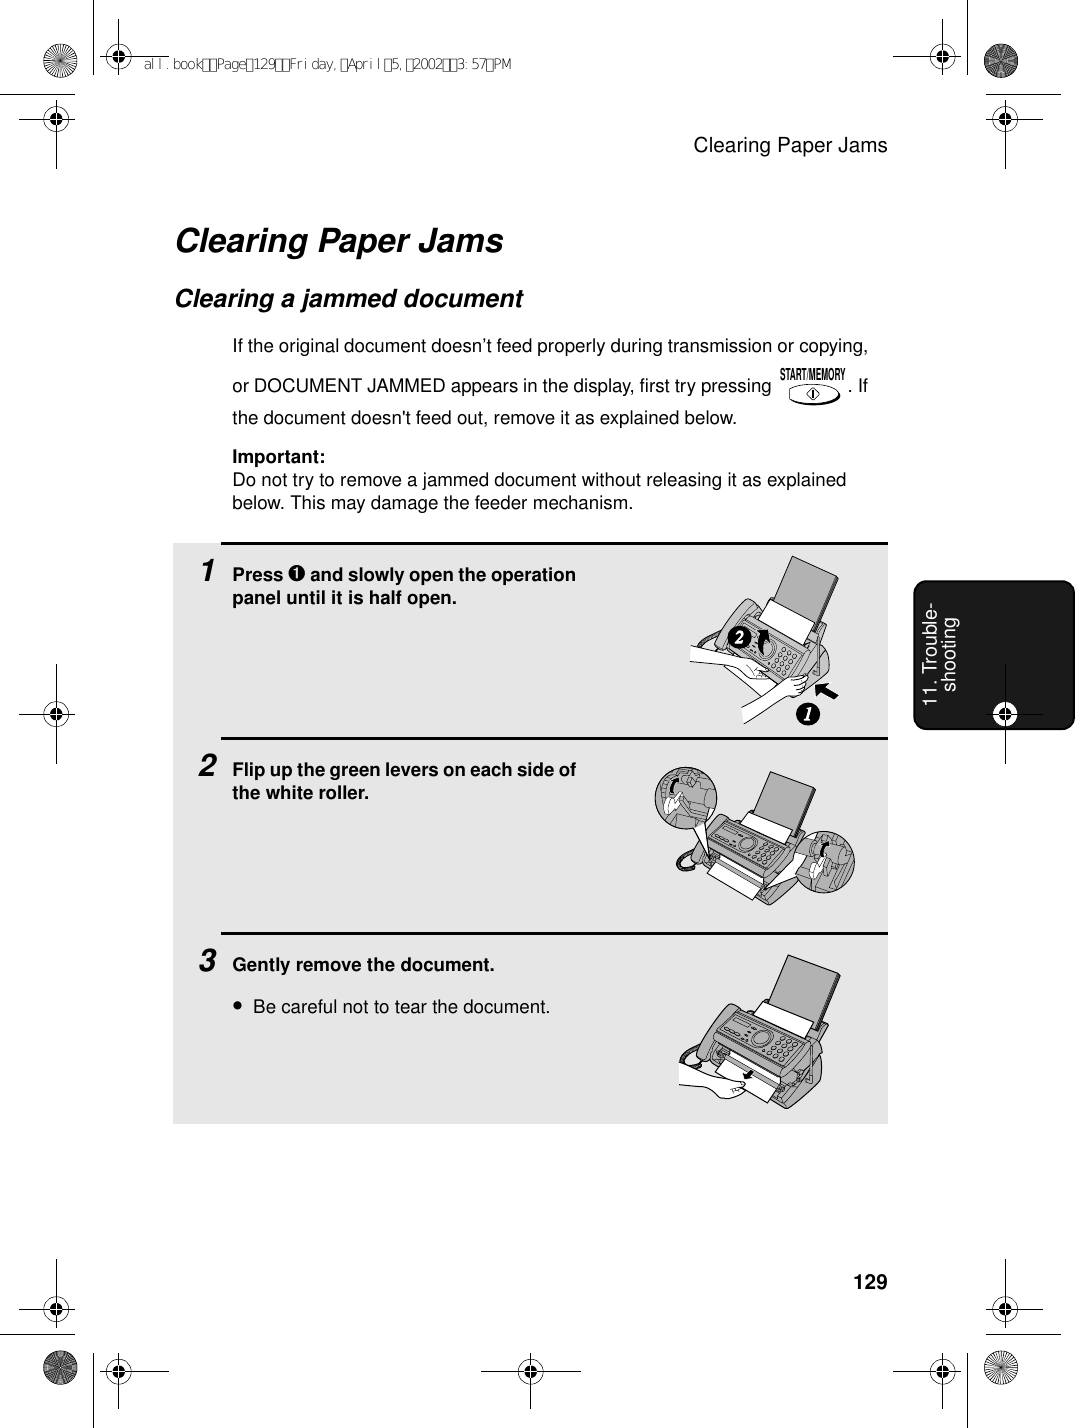 Clearing Paper Jams12911. Trouble-shootingClearing Paper JamsClearing a jammed documentIf the original document doesn’t feed properly during transmission or copying, or DOCUMENT JAMMED appears in the display, first try pressing  . If the document doesn&apos;t feed out, remove it as explained below.Important:Do not try to remove a jammed document without releasing it as explained below. This may damage the feeder mechanism.START/MEMORY1Press ➊ and slowly open the operation panel until it is half open.2Flip up the green levers on each side of the white roller.3Gently remove the document.•Be careful not to tear the document.12all.bookPage129Friday,April5,20023:57PM